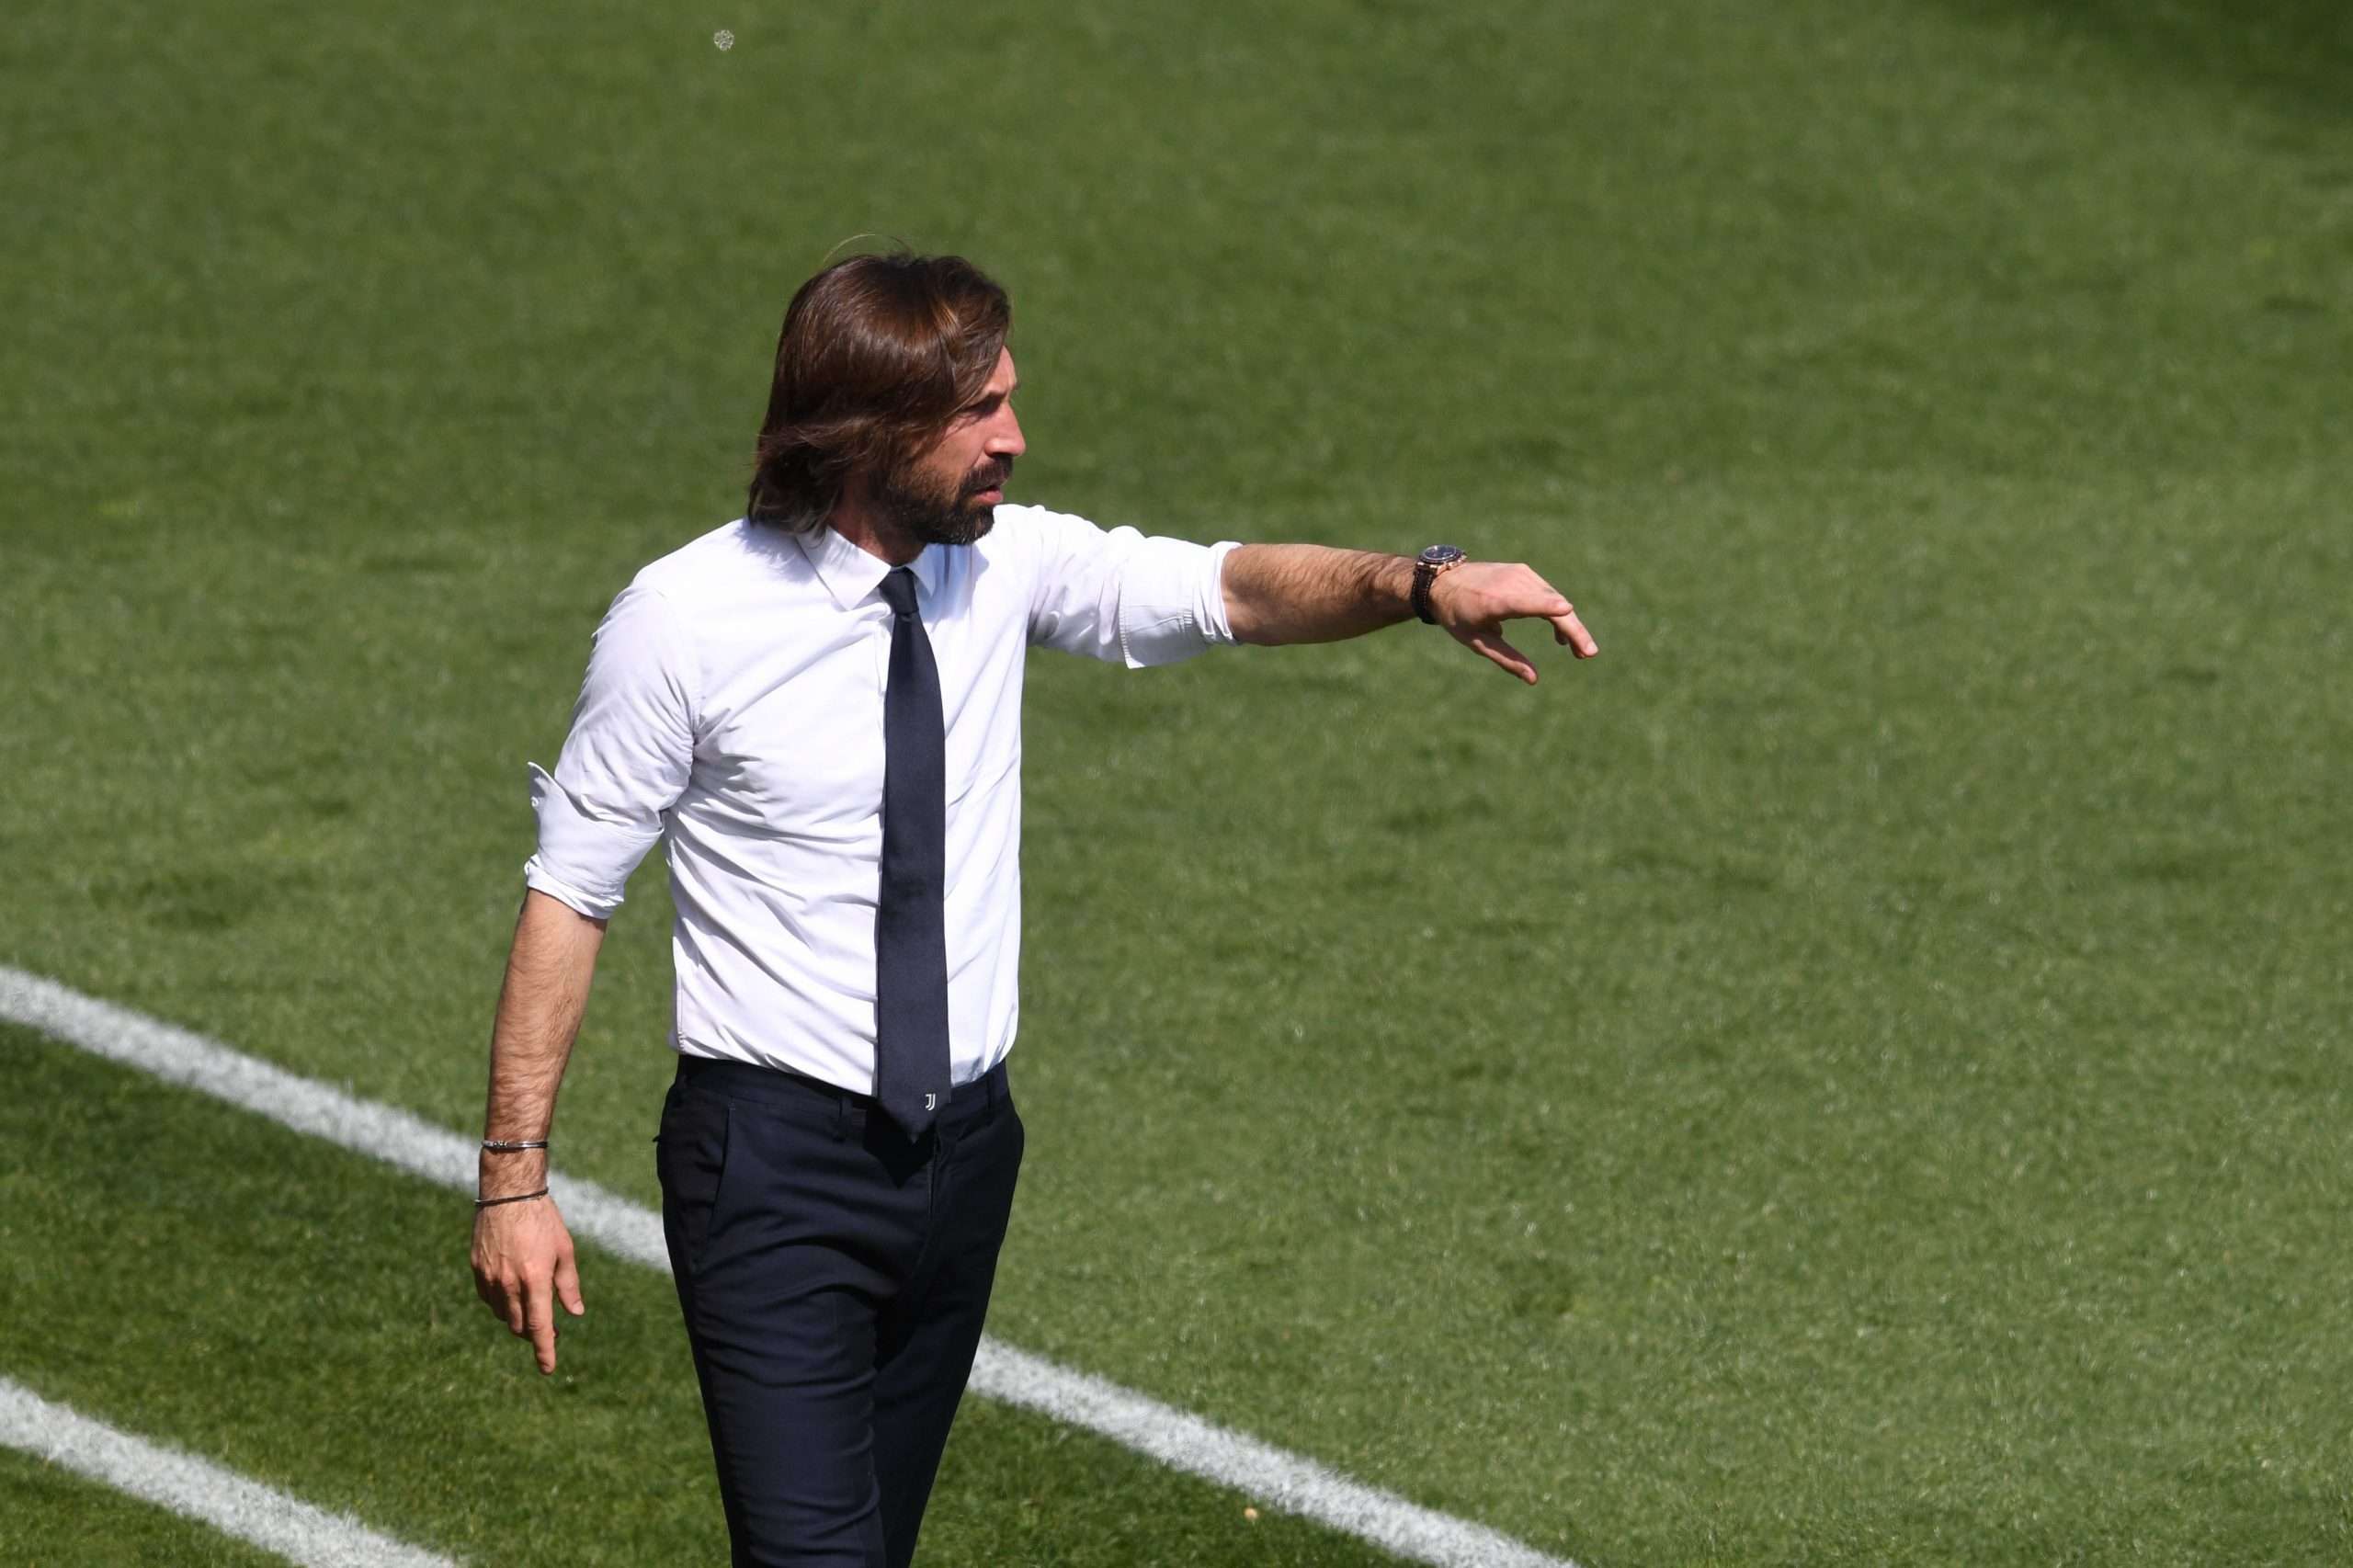 Andrea Pirlo appointed as coach of Sampdoria for Serie B campaign